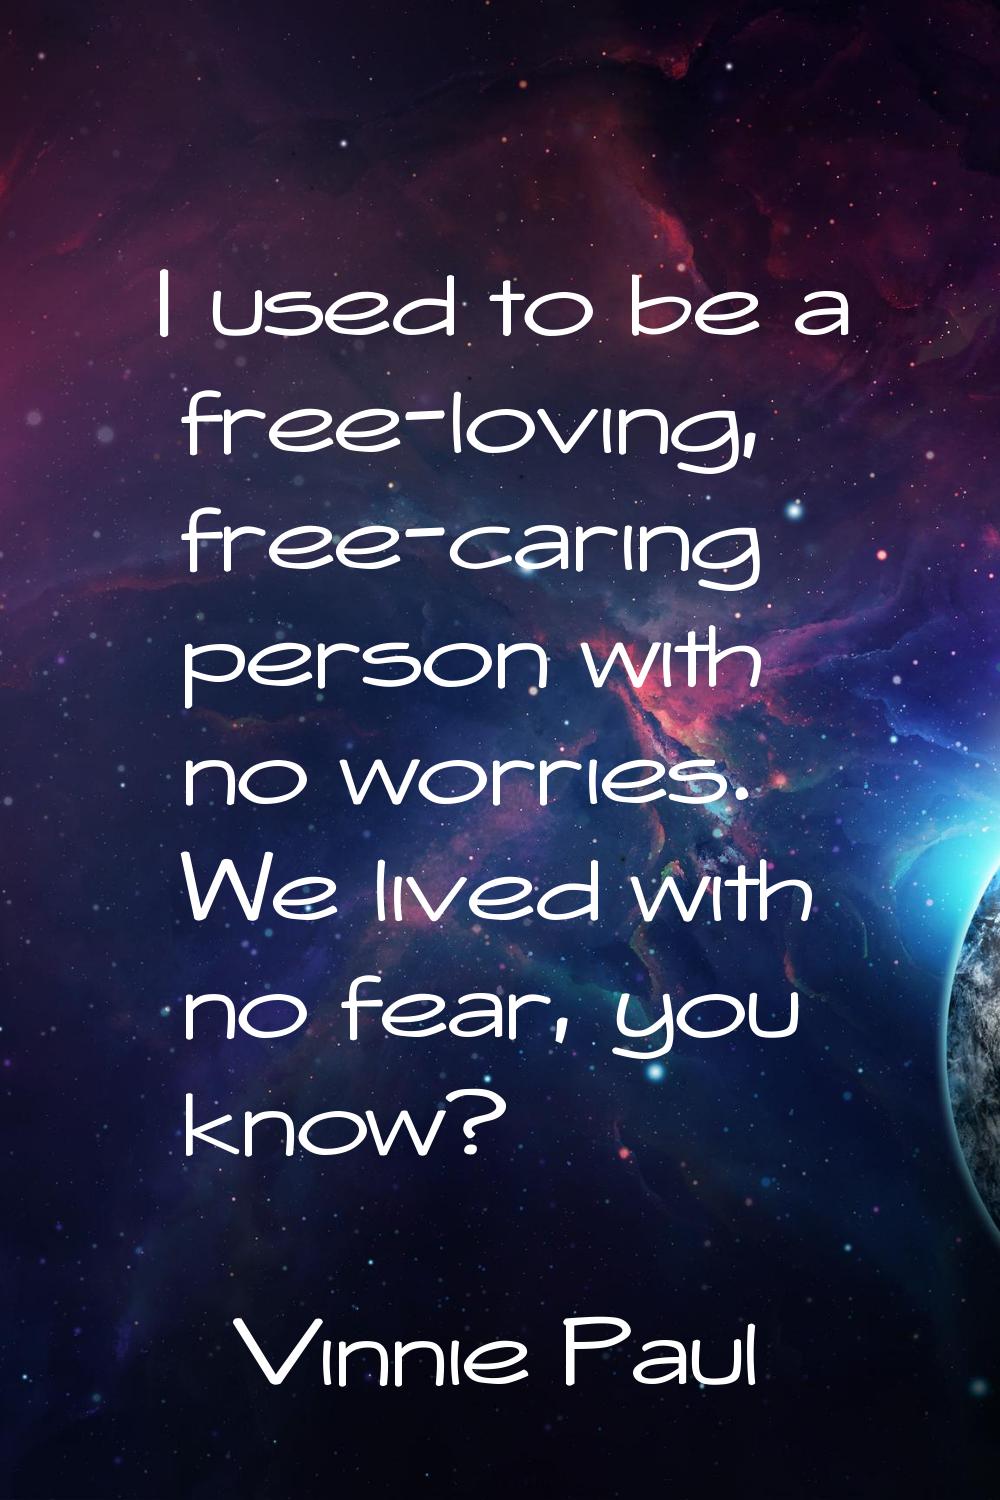 I used to be a free-loving, free-caring person with no worries. We lived with no fear, you know?